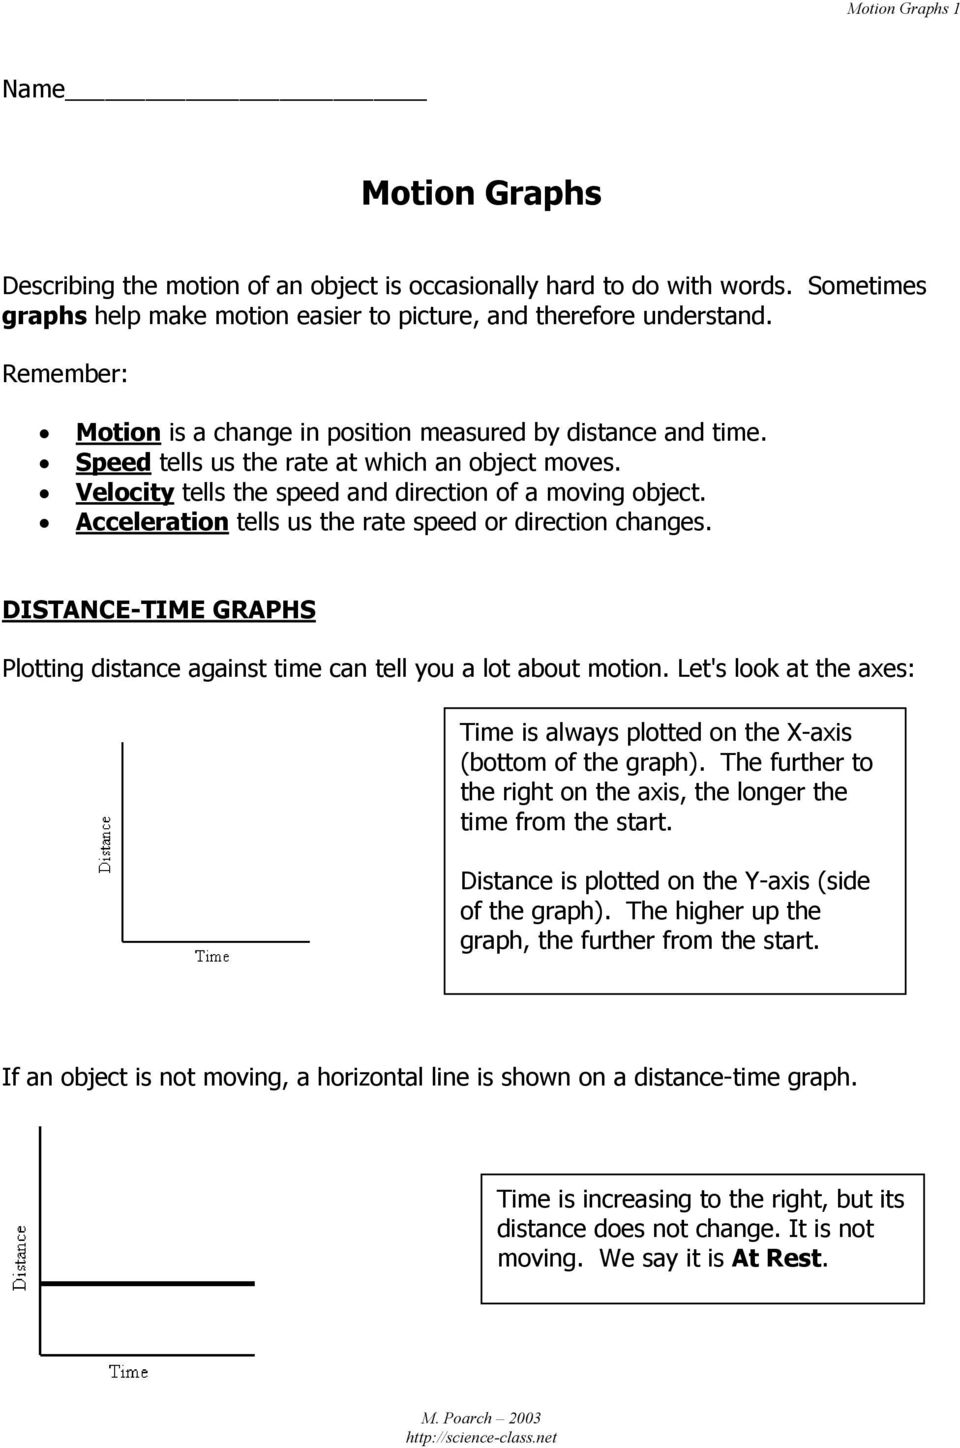 Motion Graphs. Plotting distance against time can tell you a lot Regarding Motion Graphs Worksheet Answer Key